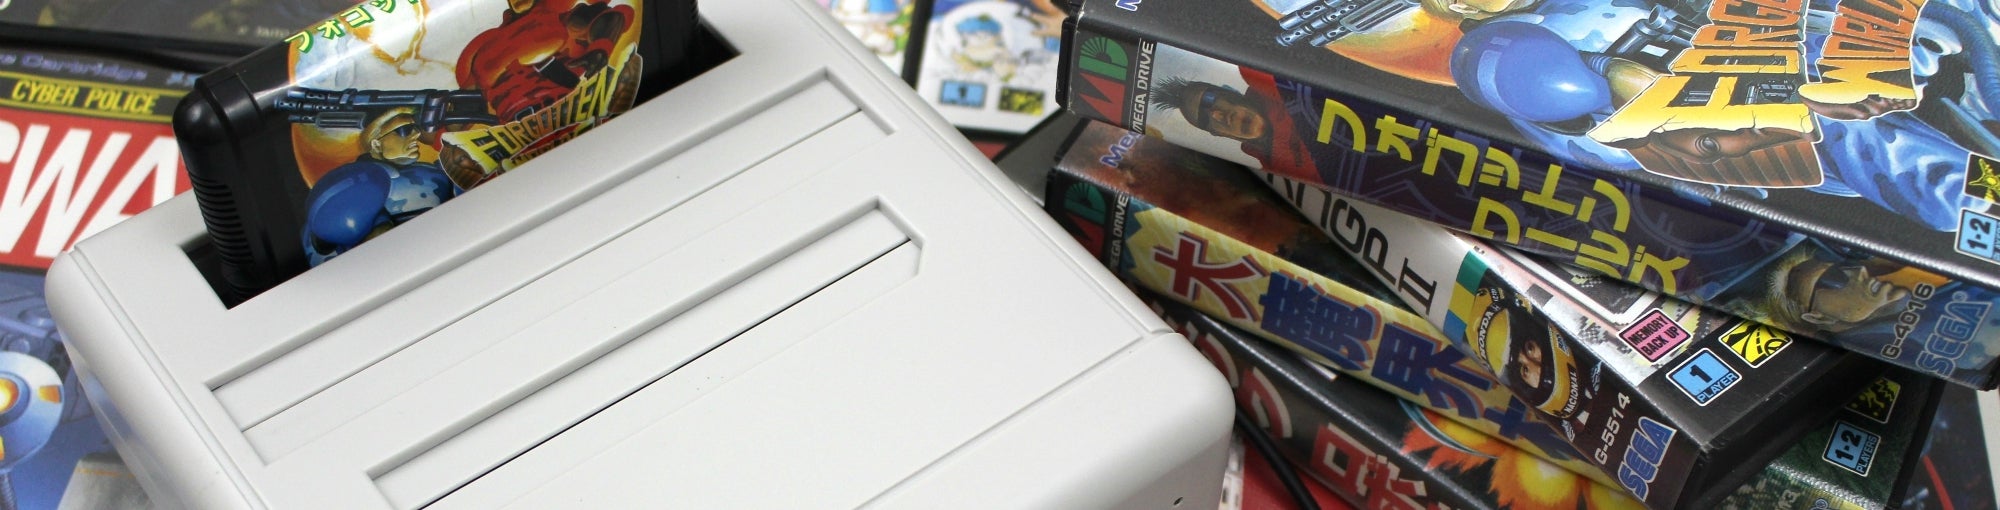 Image for The retro gaming industry could be killing video game preservation